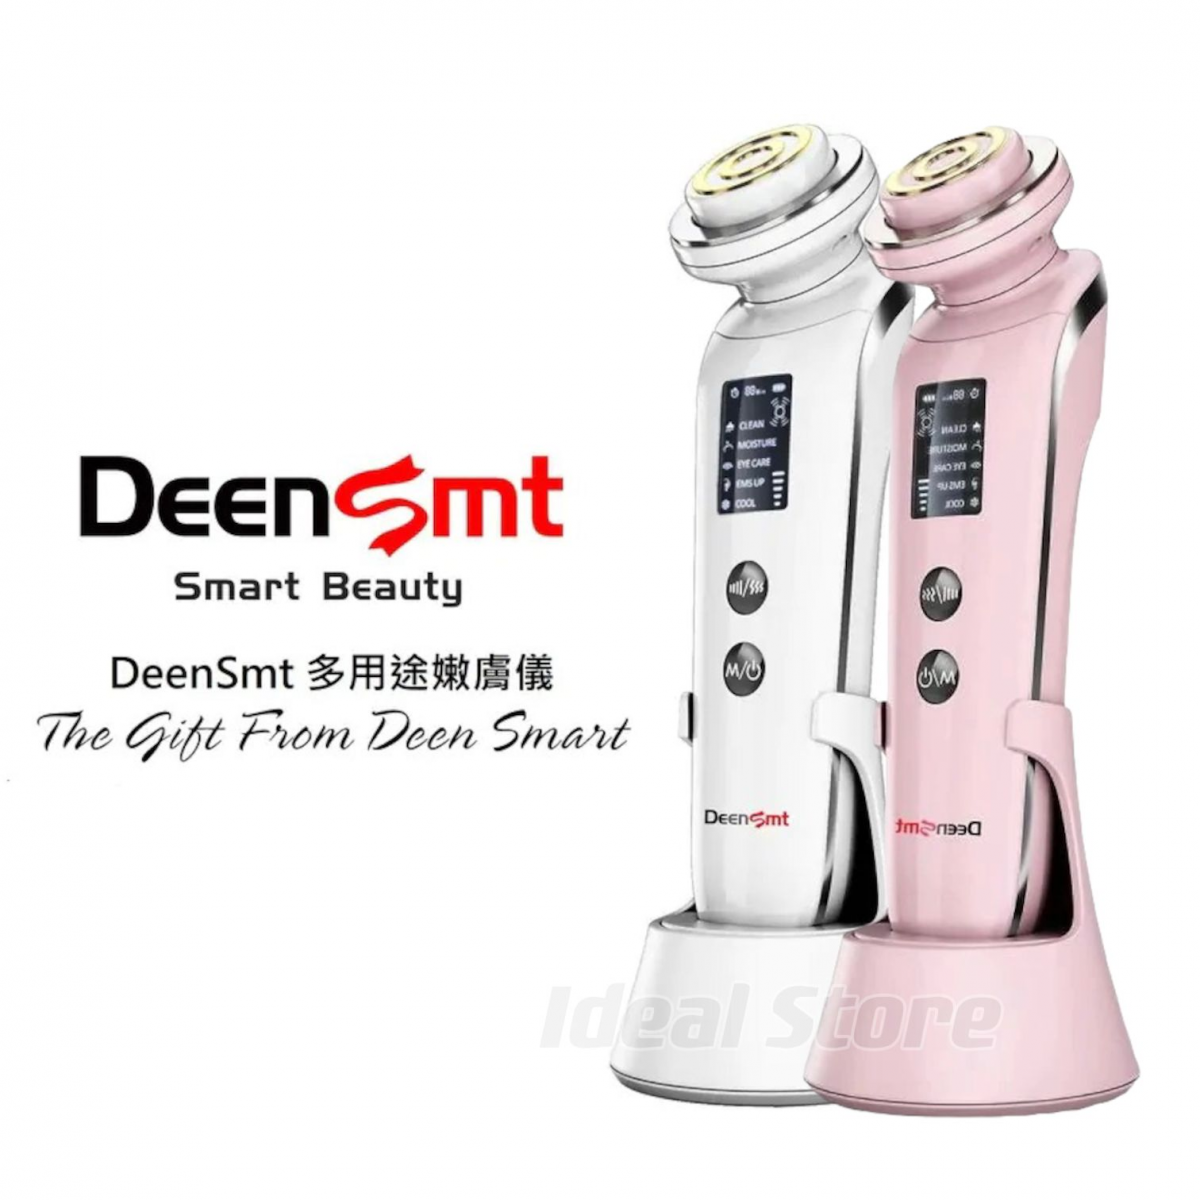 Deensmt - 24K gold-plated multi-purpose skin rejuvenation device K10｜Anti-aging｜EMS｜RF｜Ions｜Medical red and blue light｜Cold compress